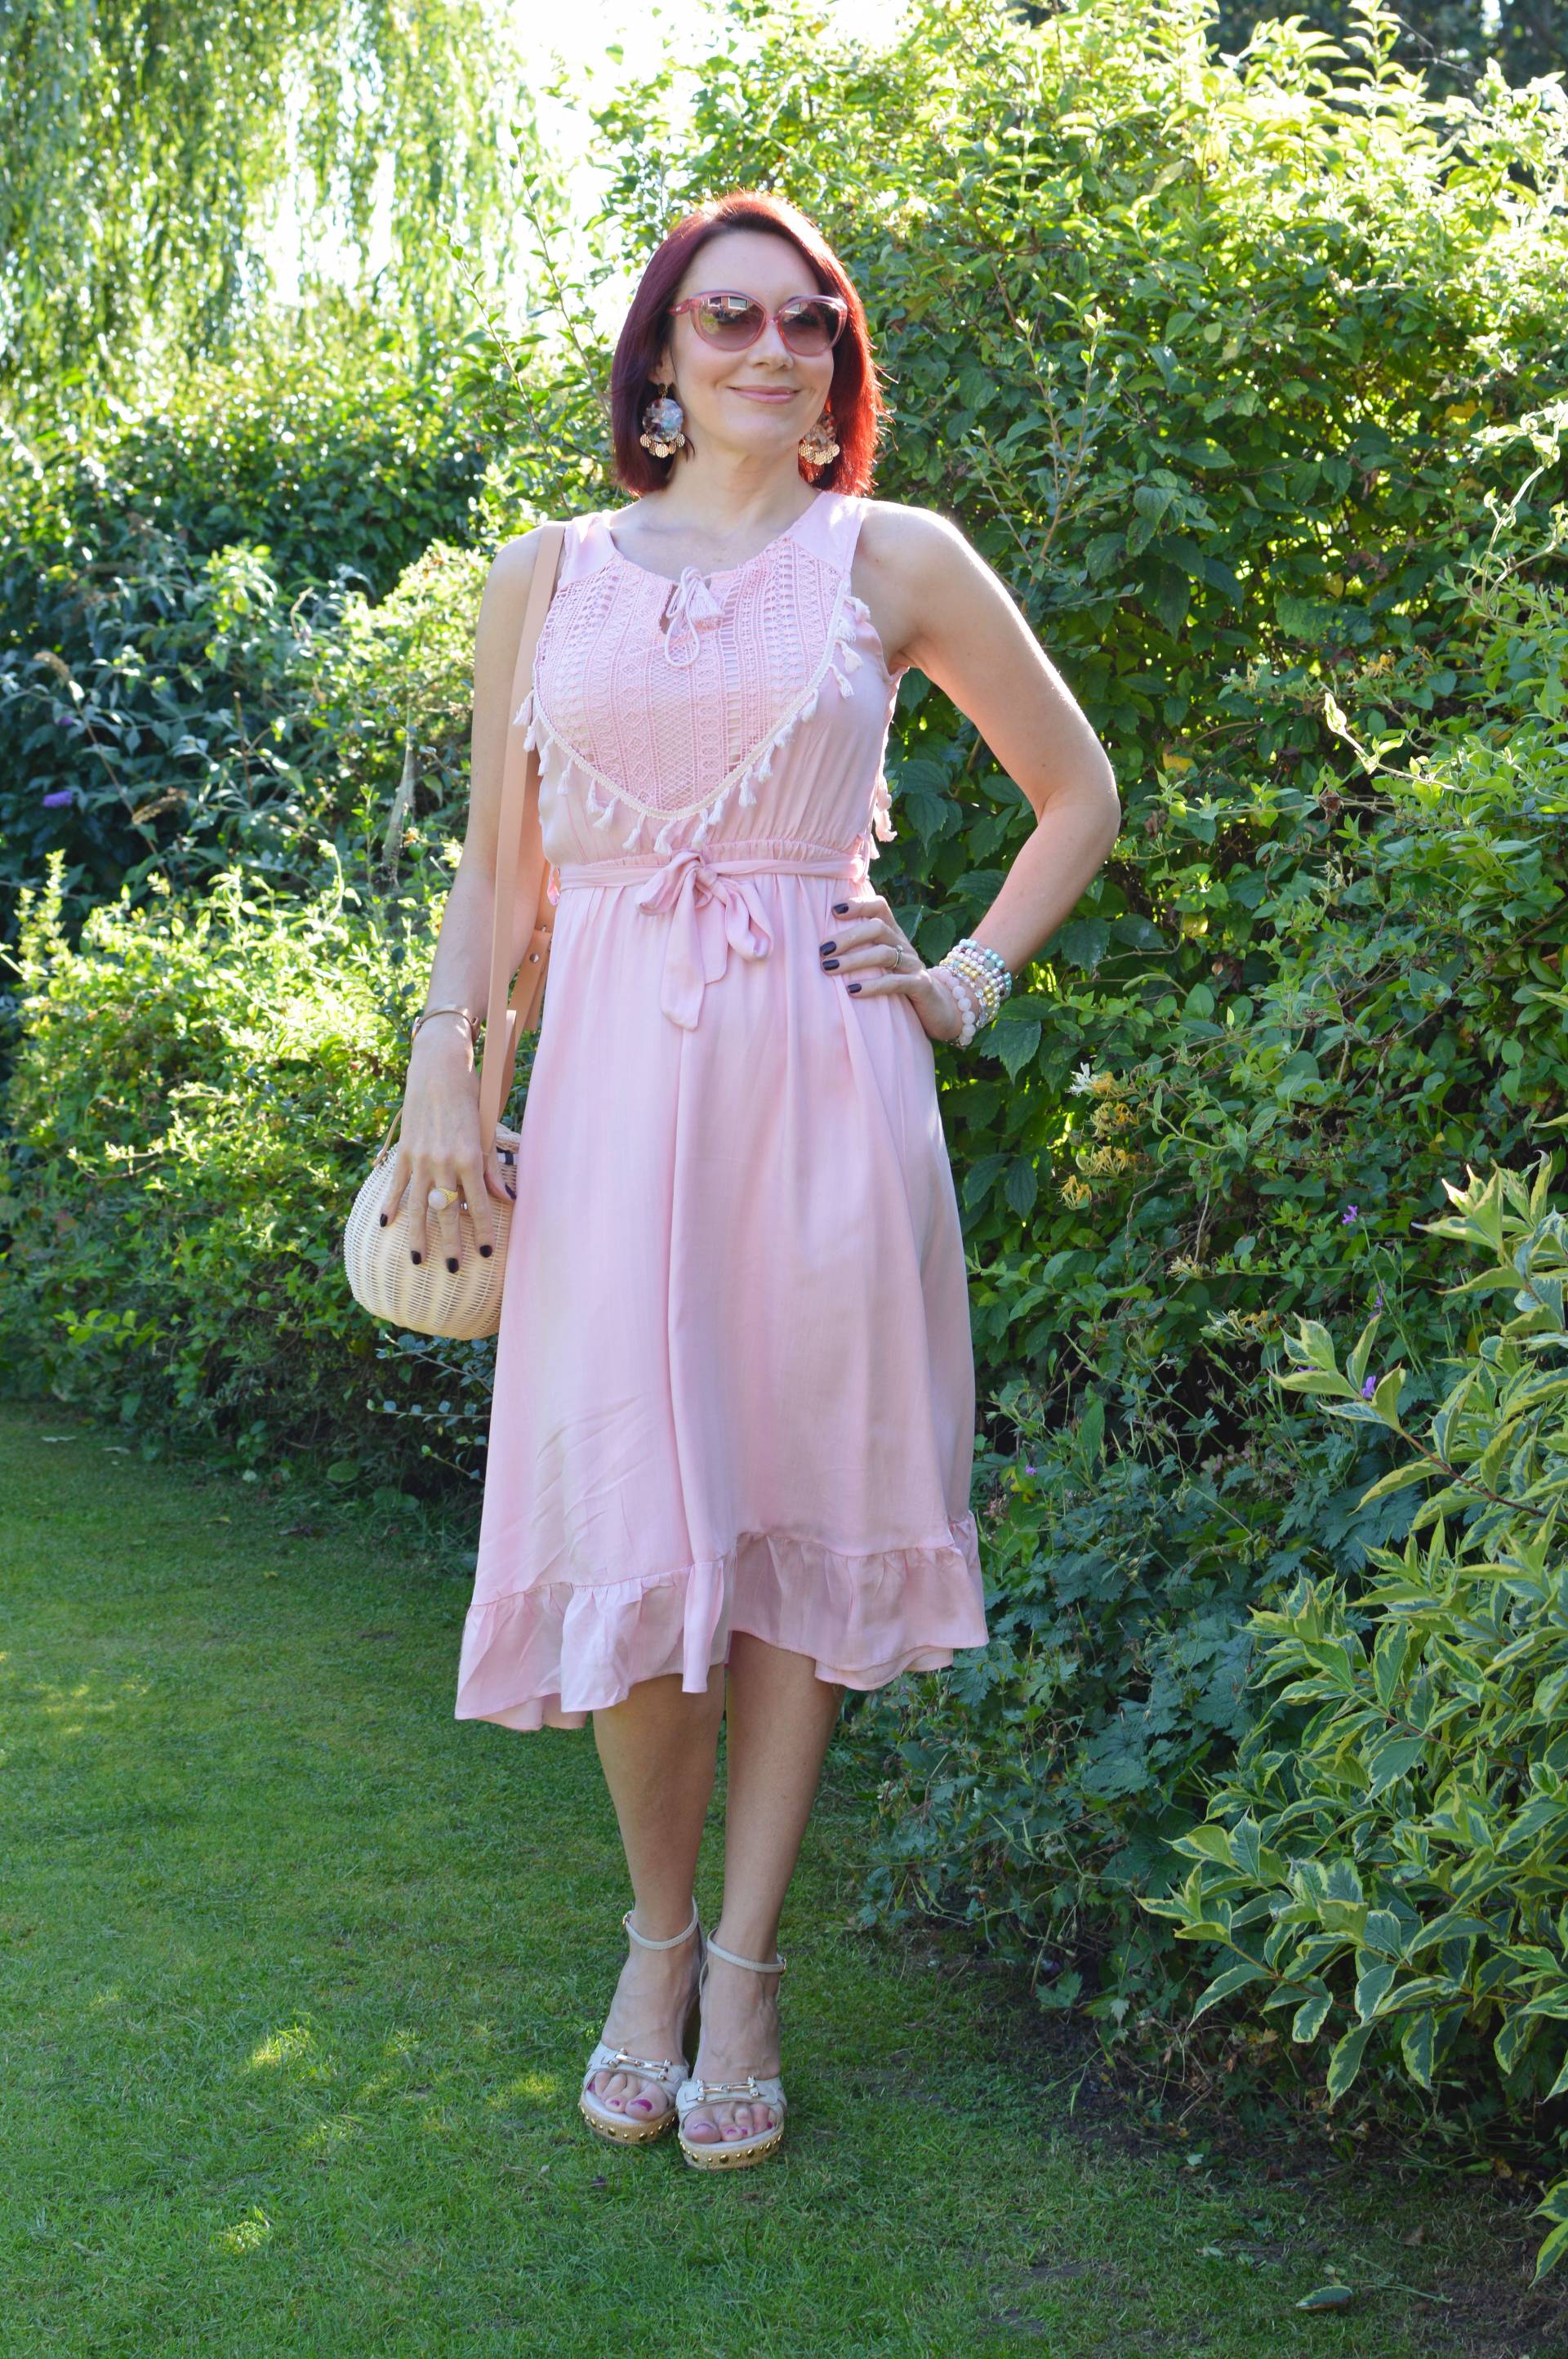 Blush Pink Cotton Sundress+ Style With a Smile link up